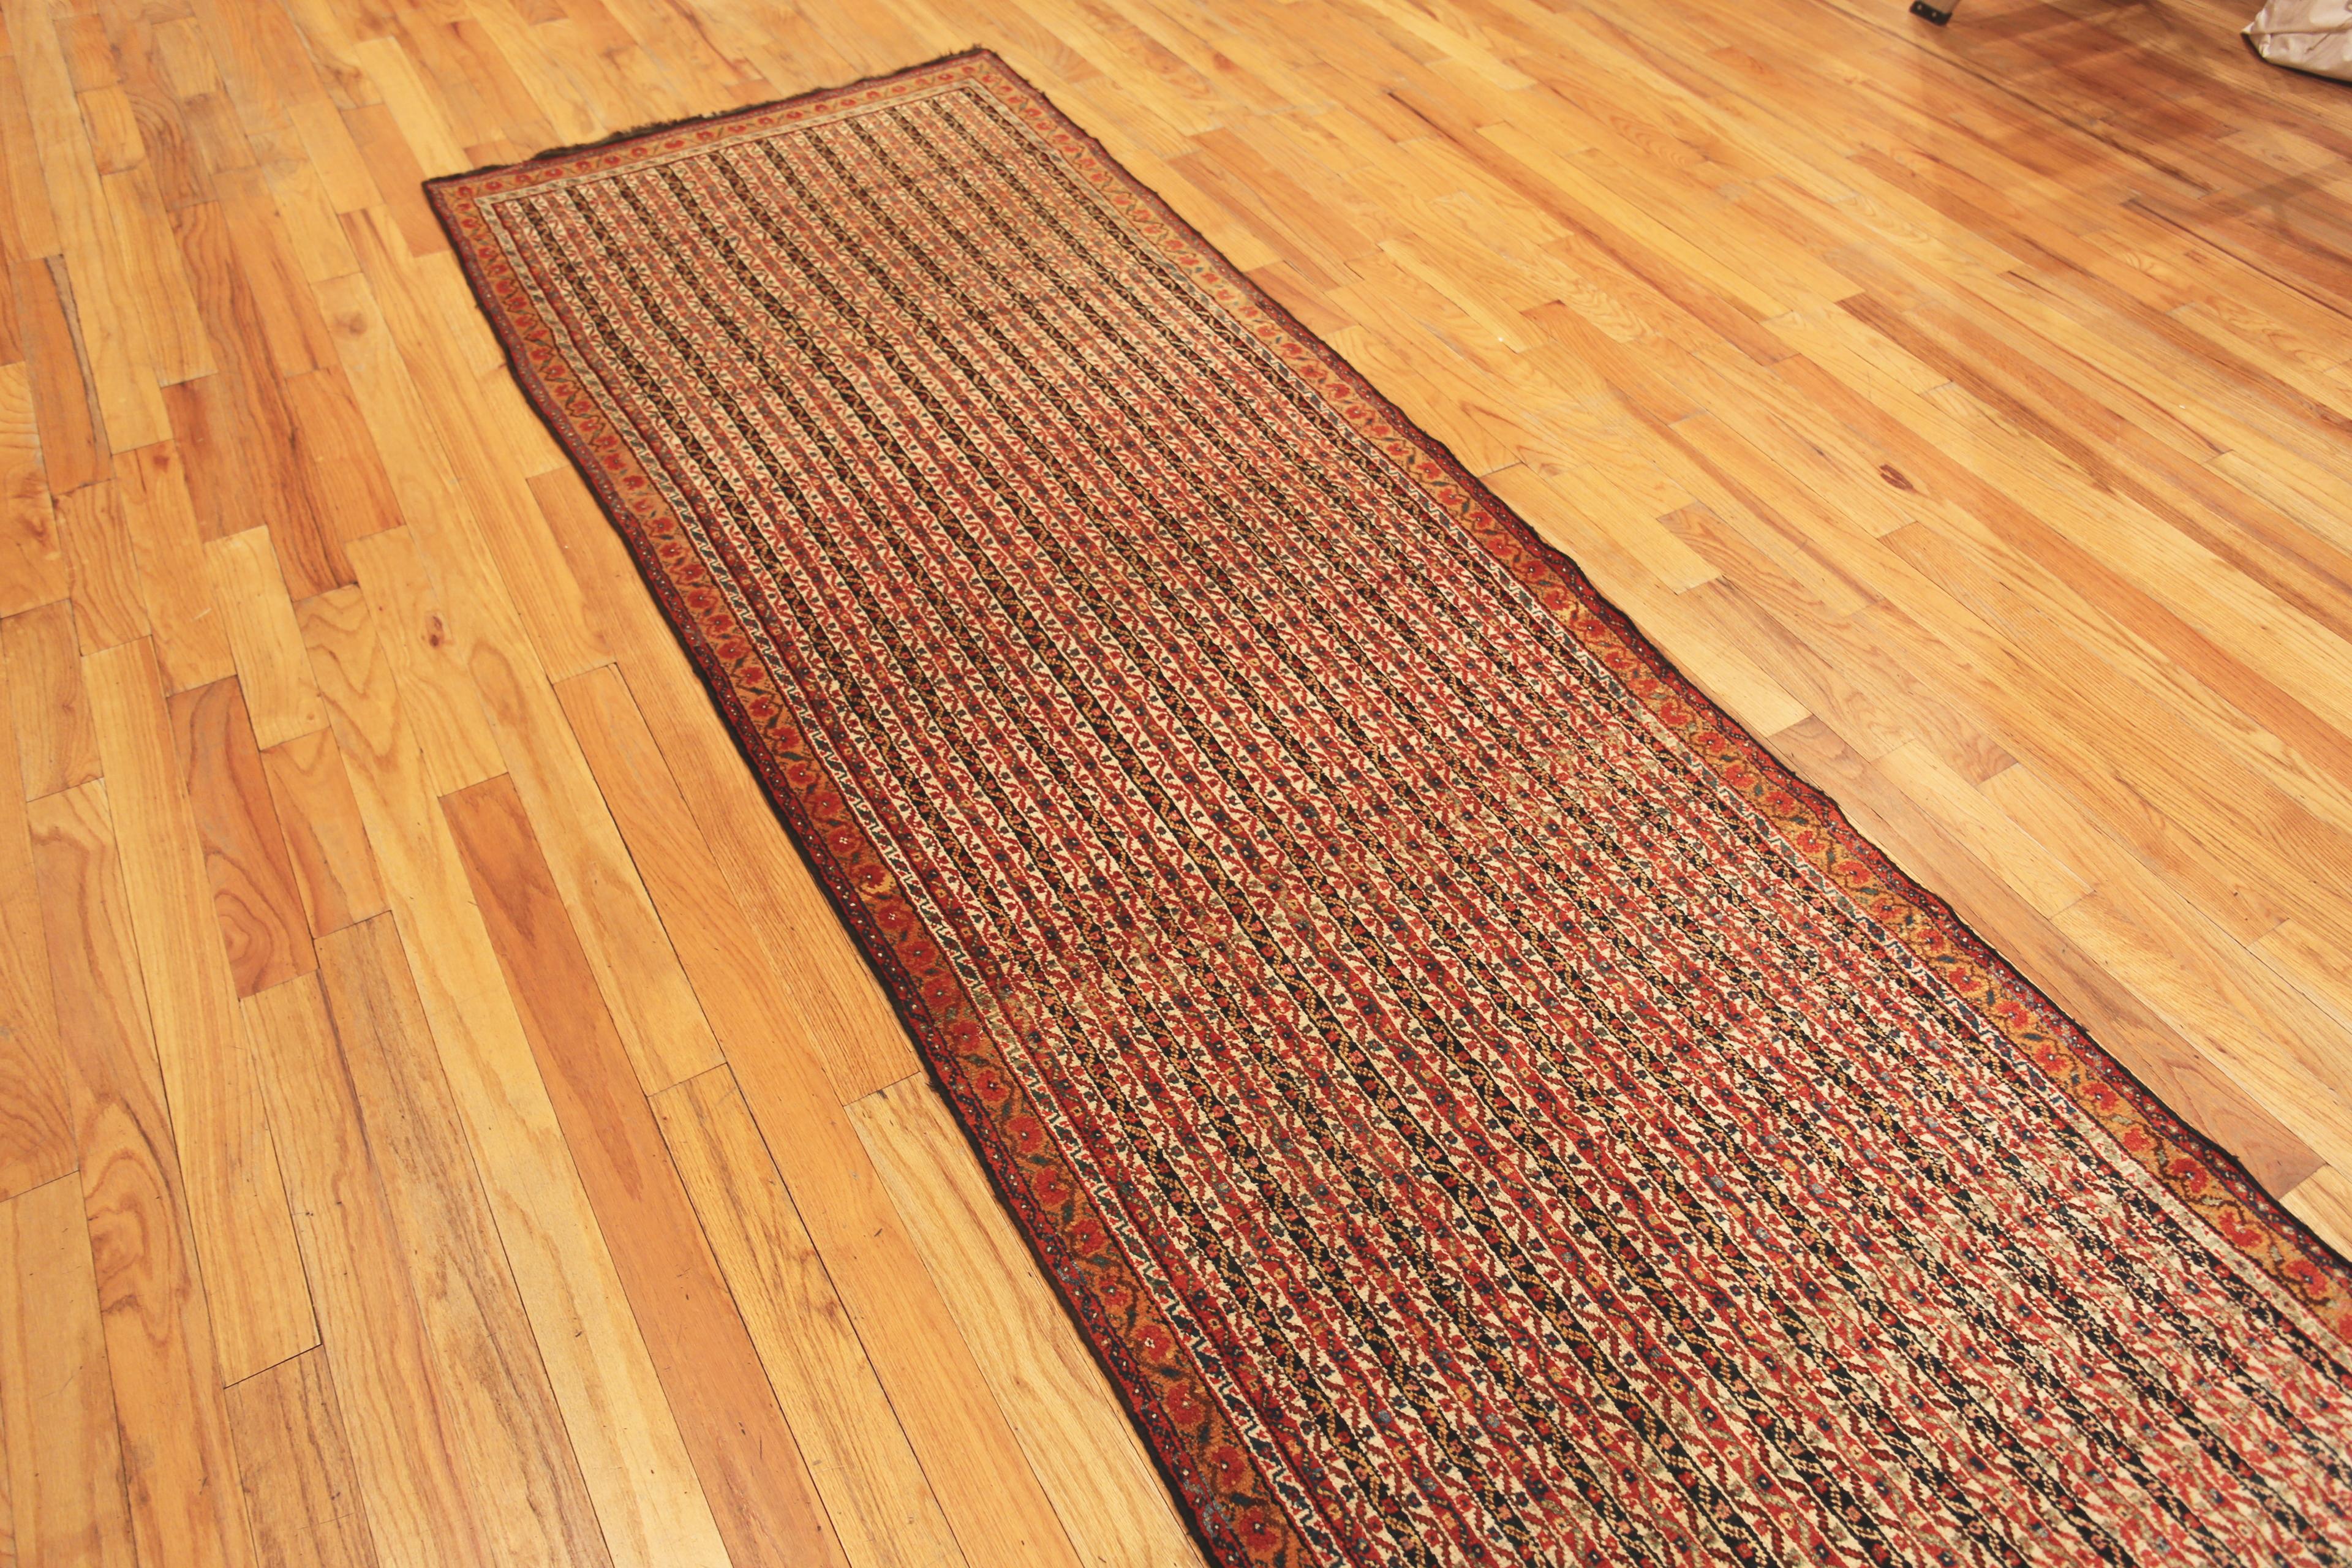 Antique Persian Qashqai Runner Rug, Country of Origin: Persian Rug, Circa date: 1920. Size: 3 ft 5 in x 12 ft 9 in (1.04 m x 3.89 m)